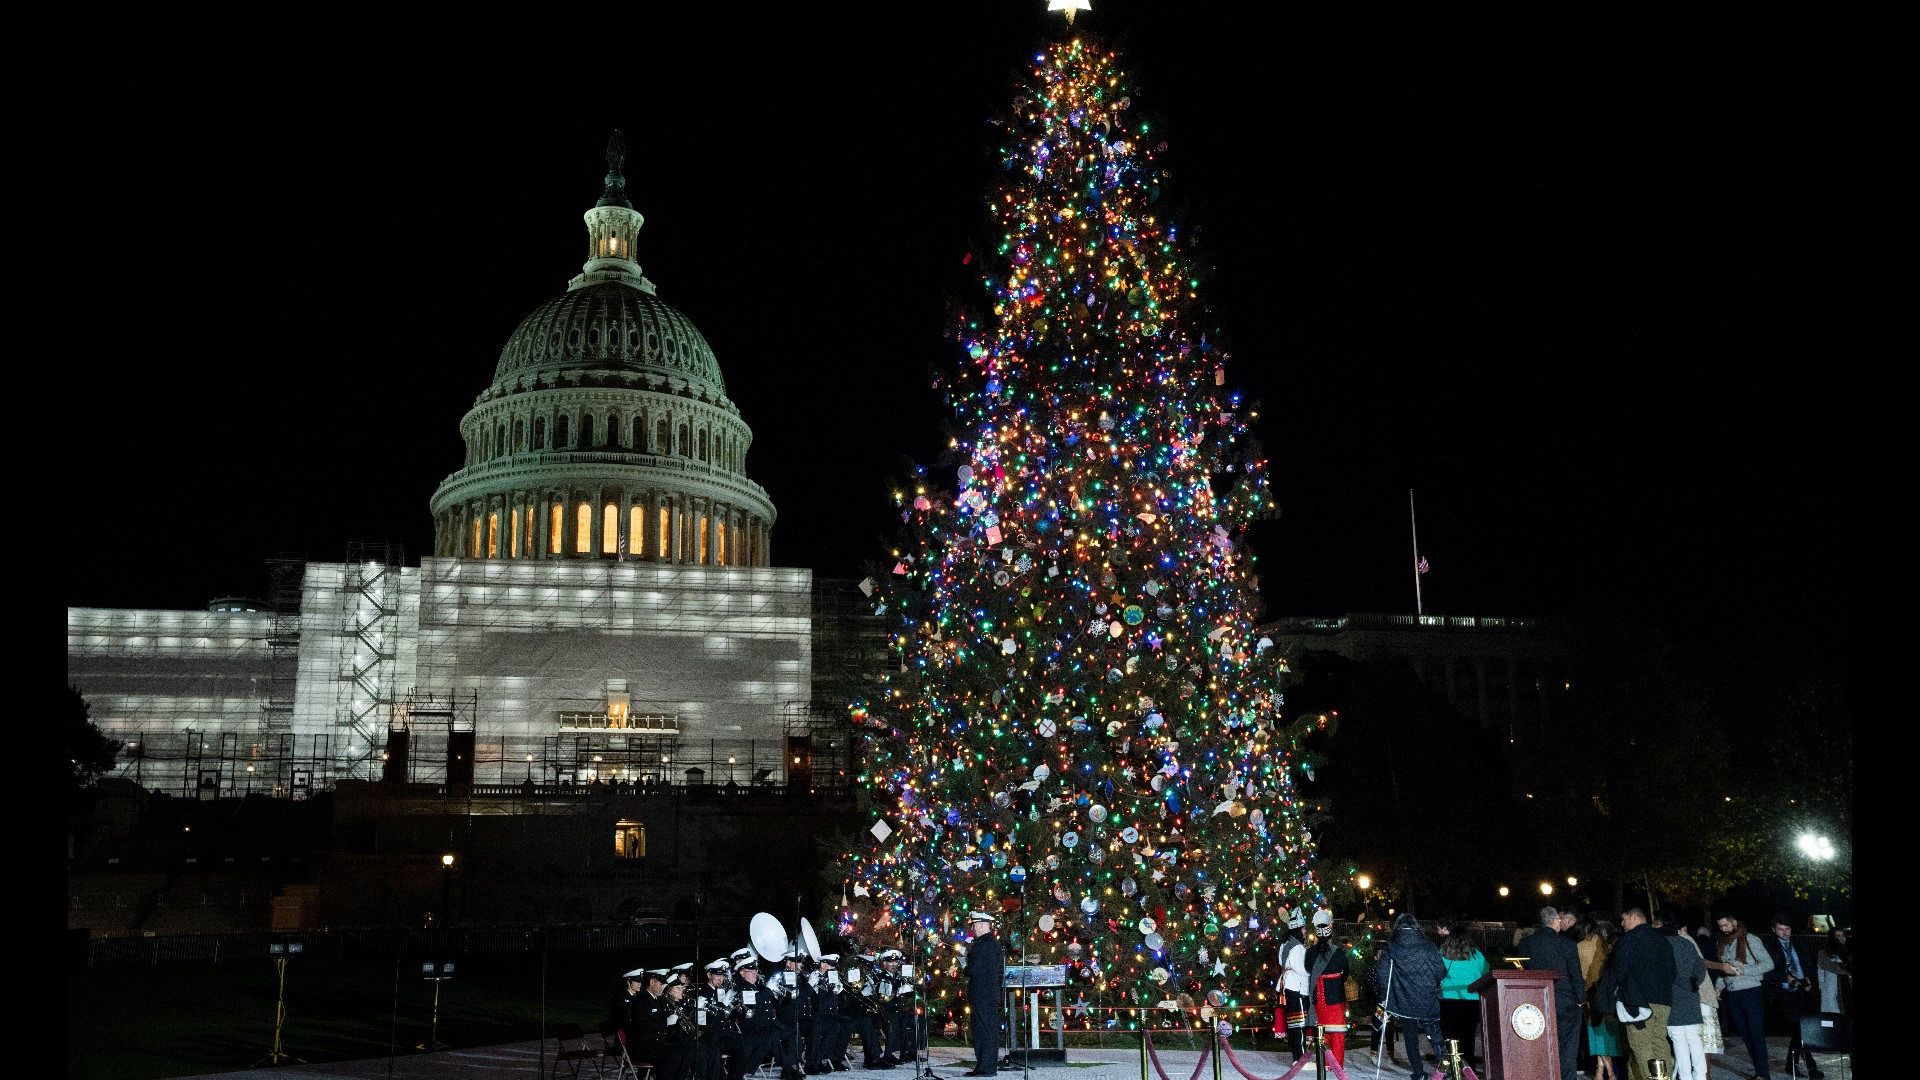 Christmas tree, a 78-foot Red Spruce from the National Forests in North Carolina, lighting ceremony at the U.S. Capitol.